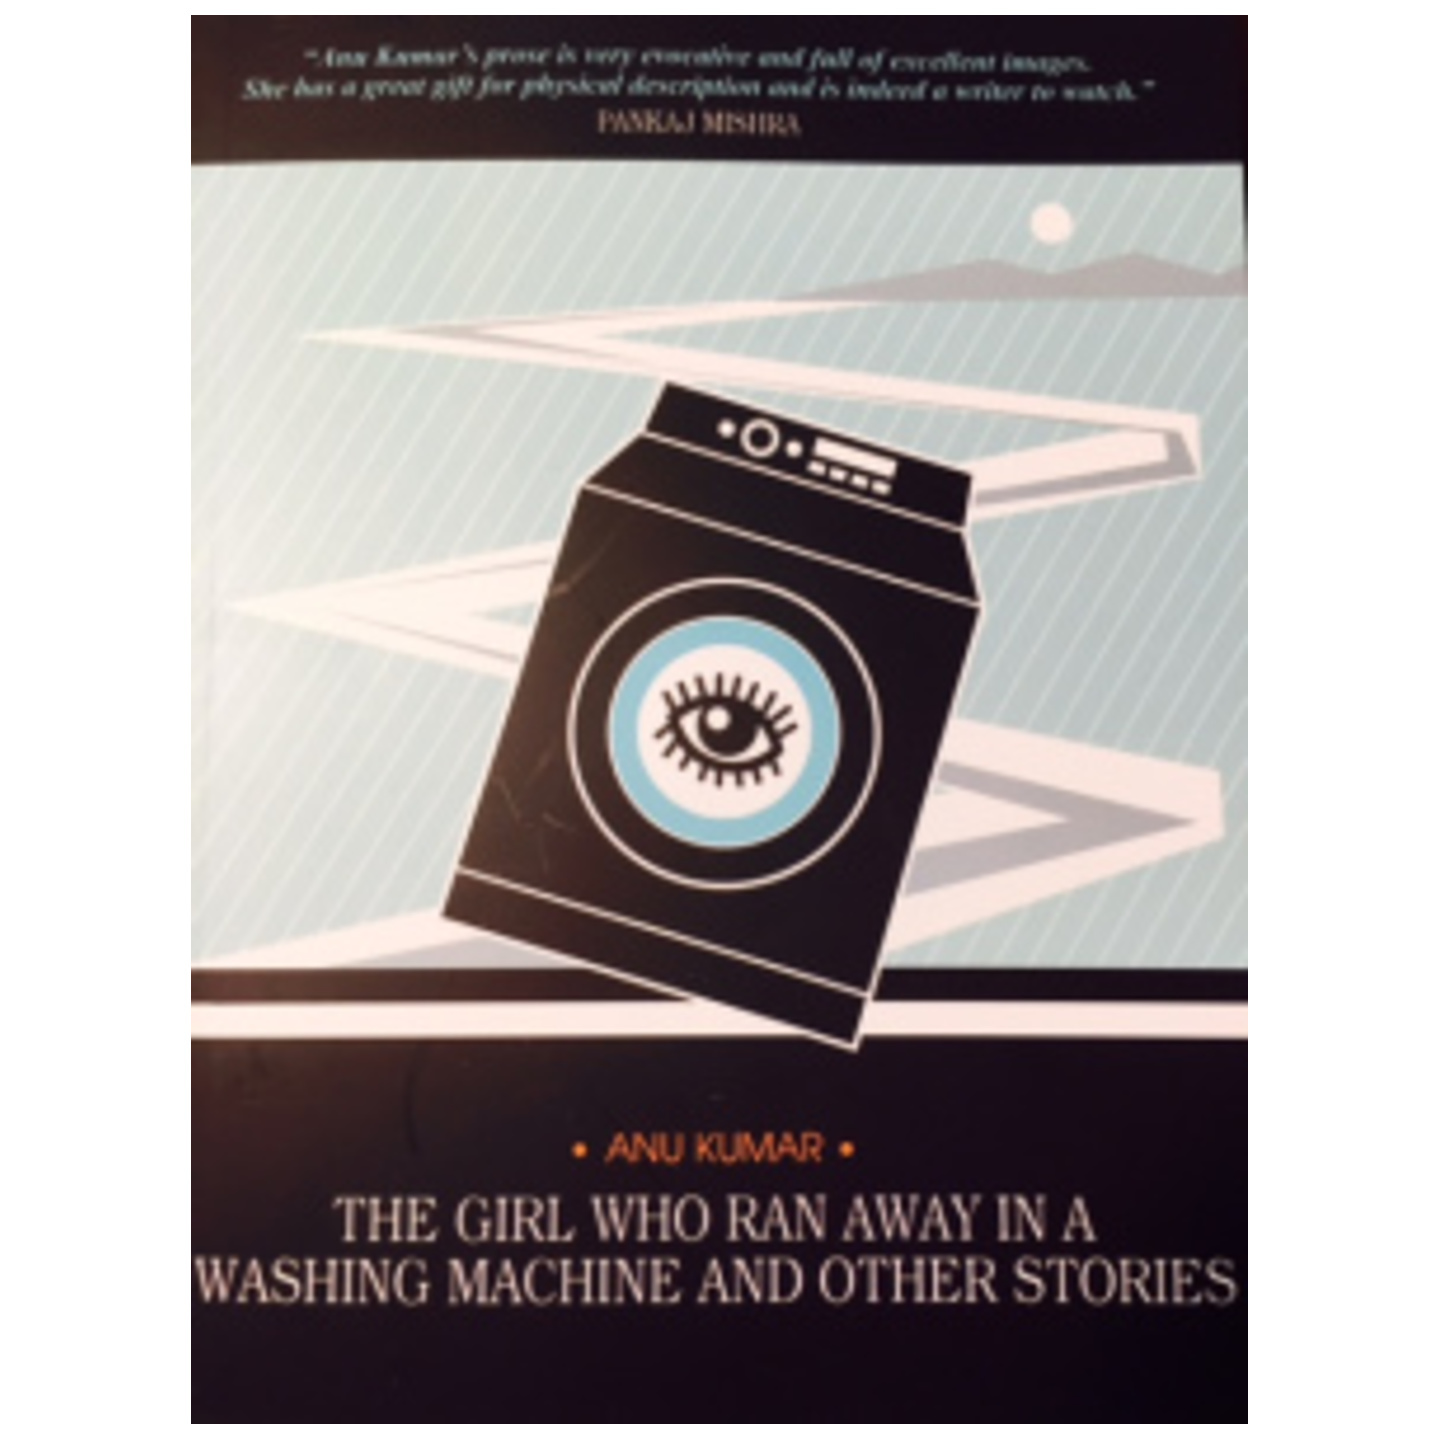 The Girl Who Ran Away in a Washing Machine and Other Stories by Anu Kumar